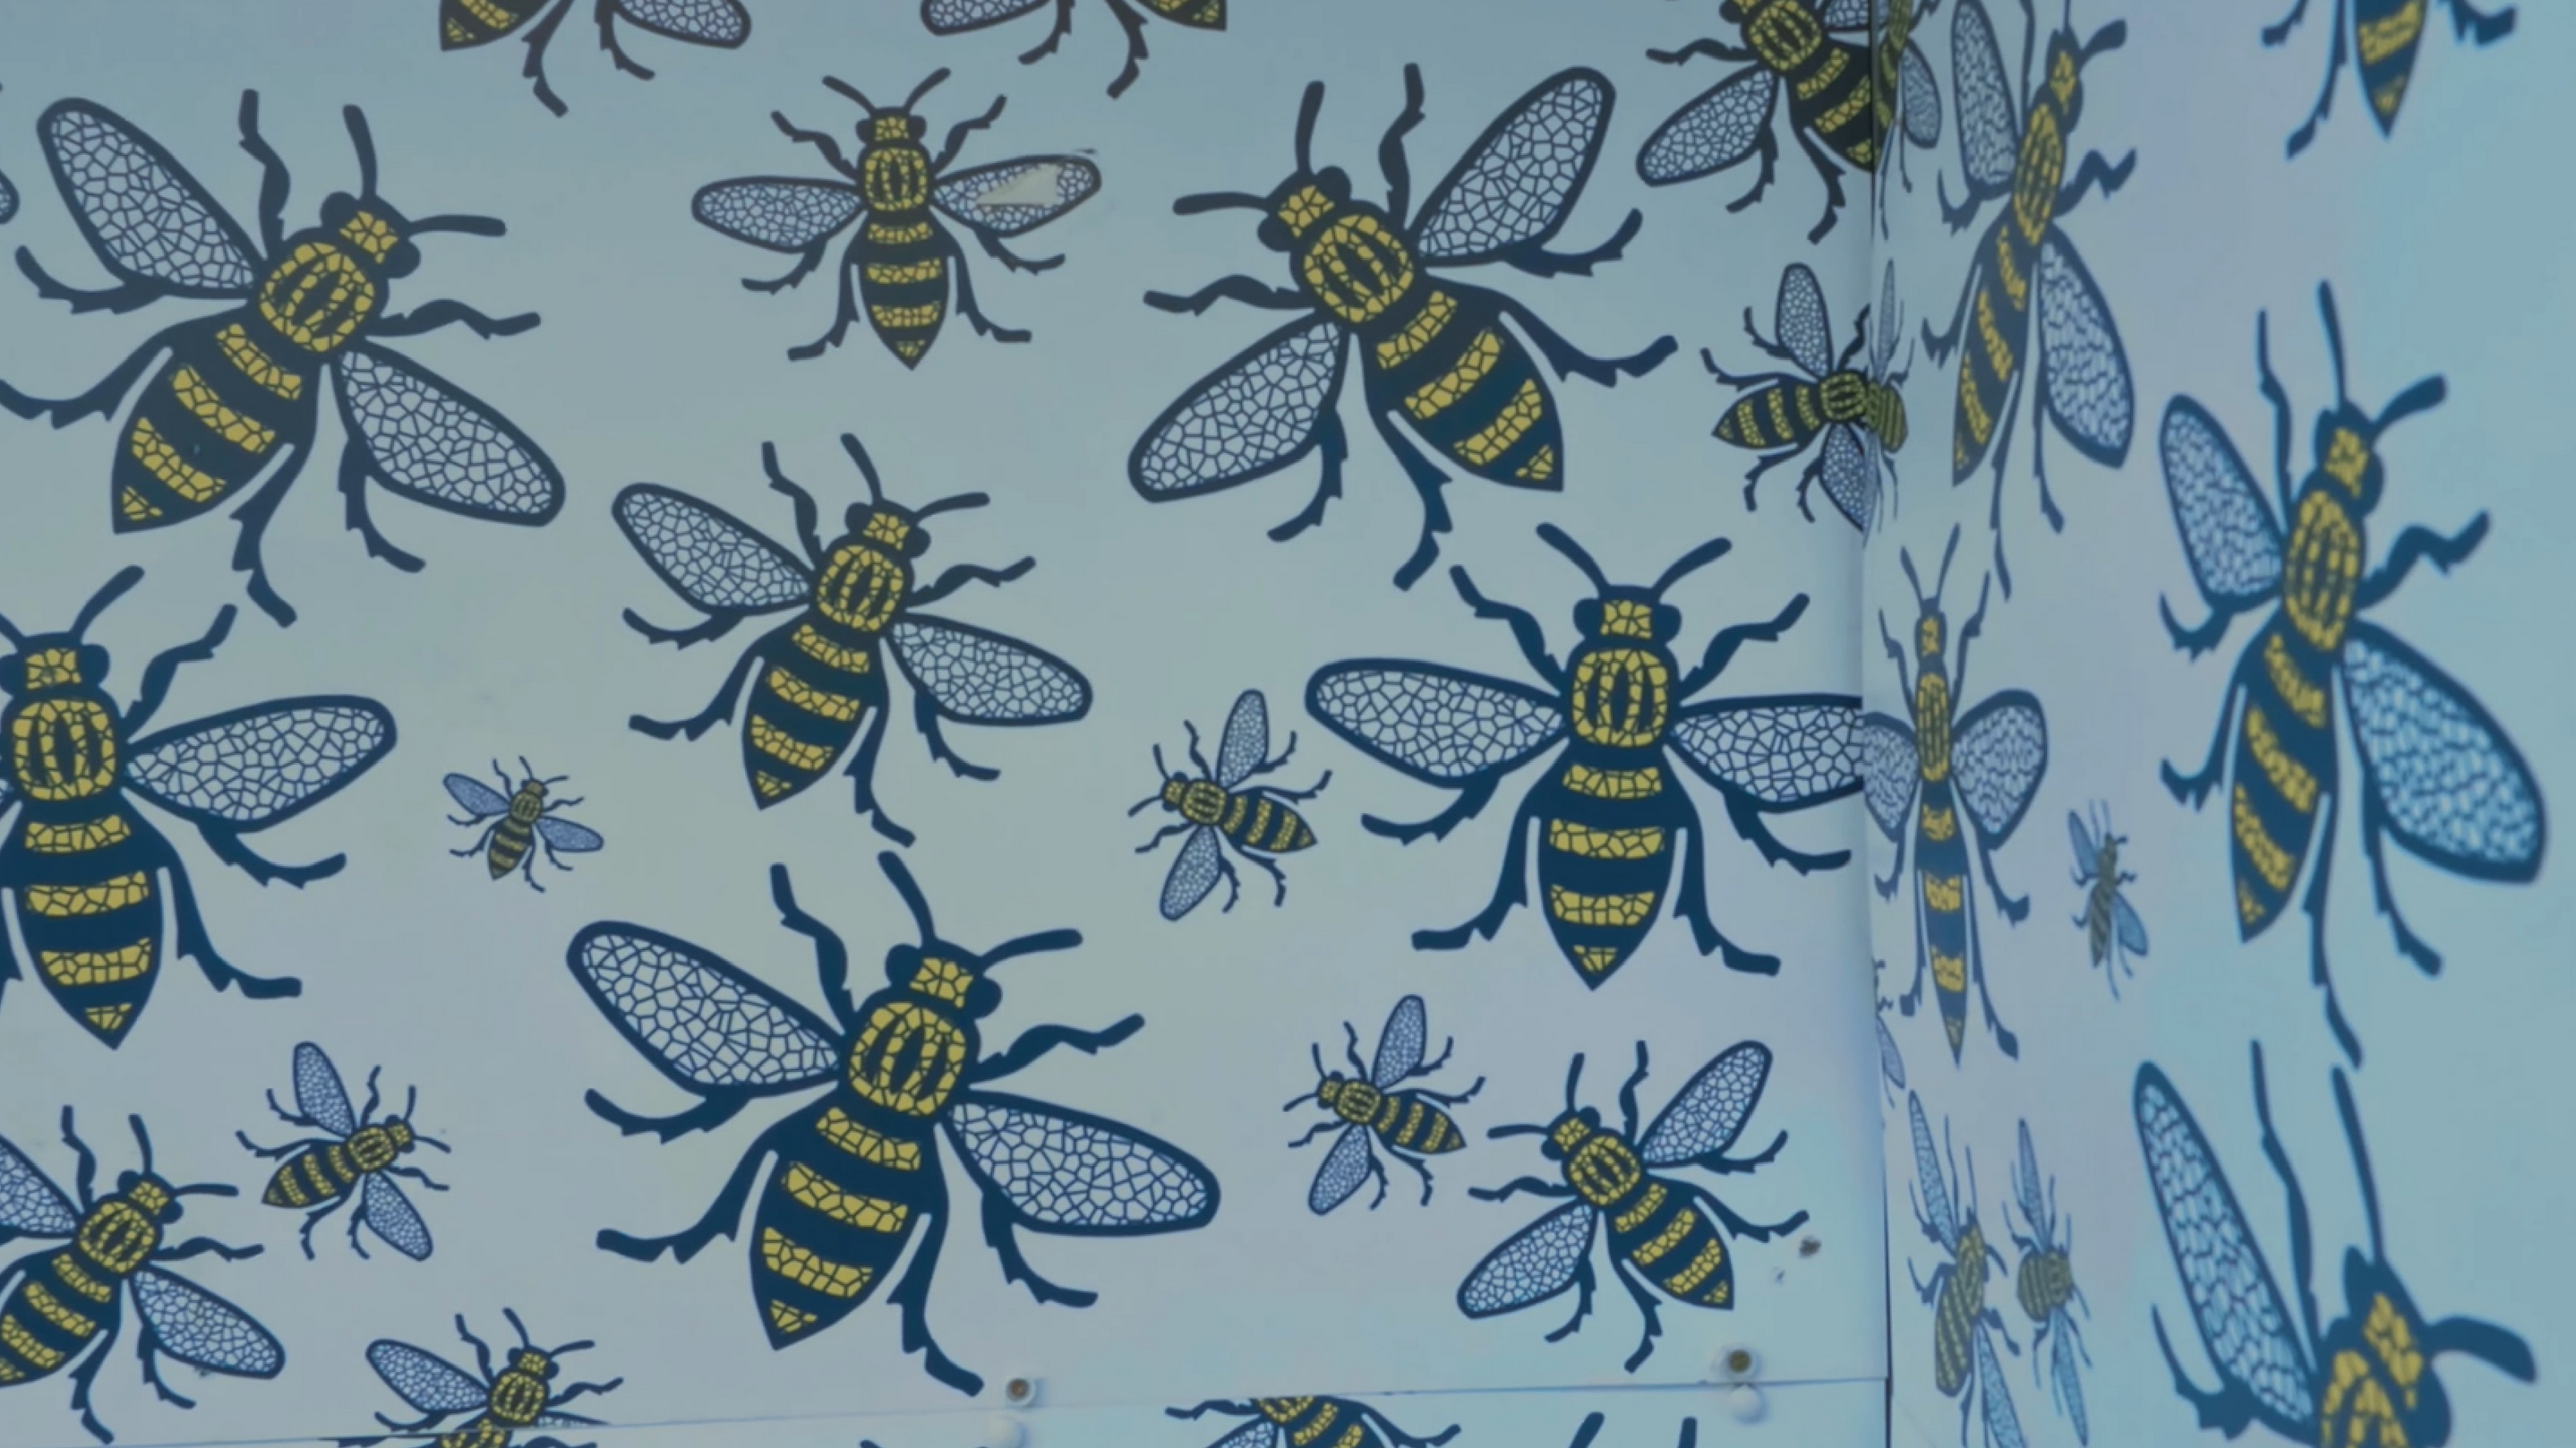 Manchester bees